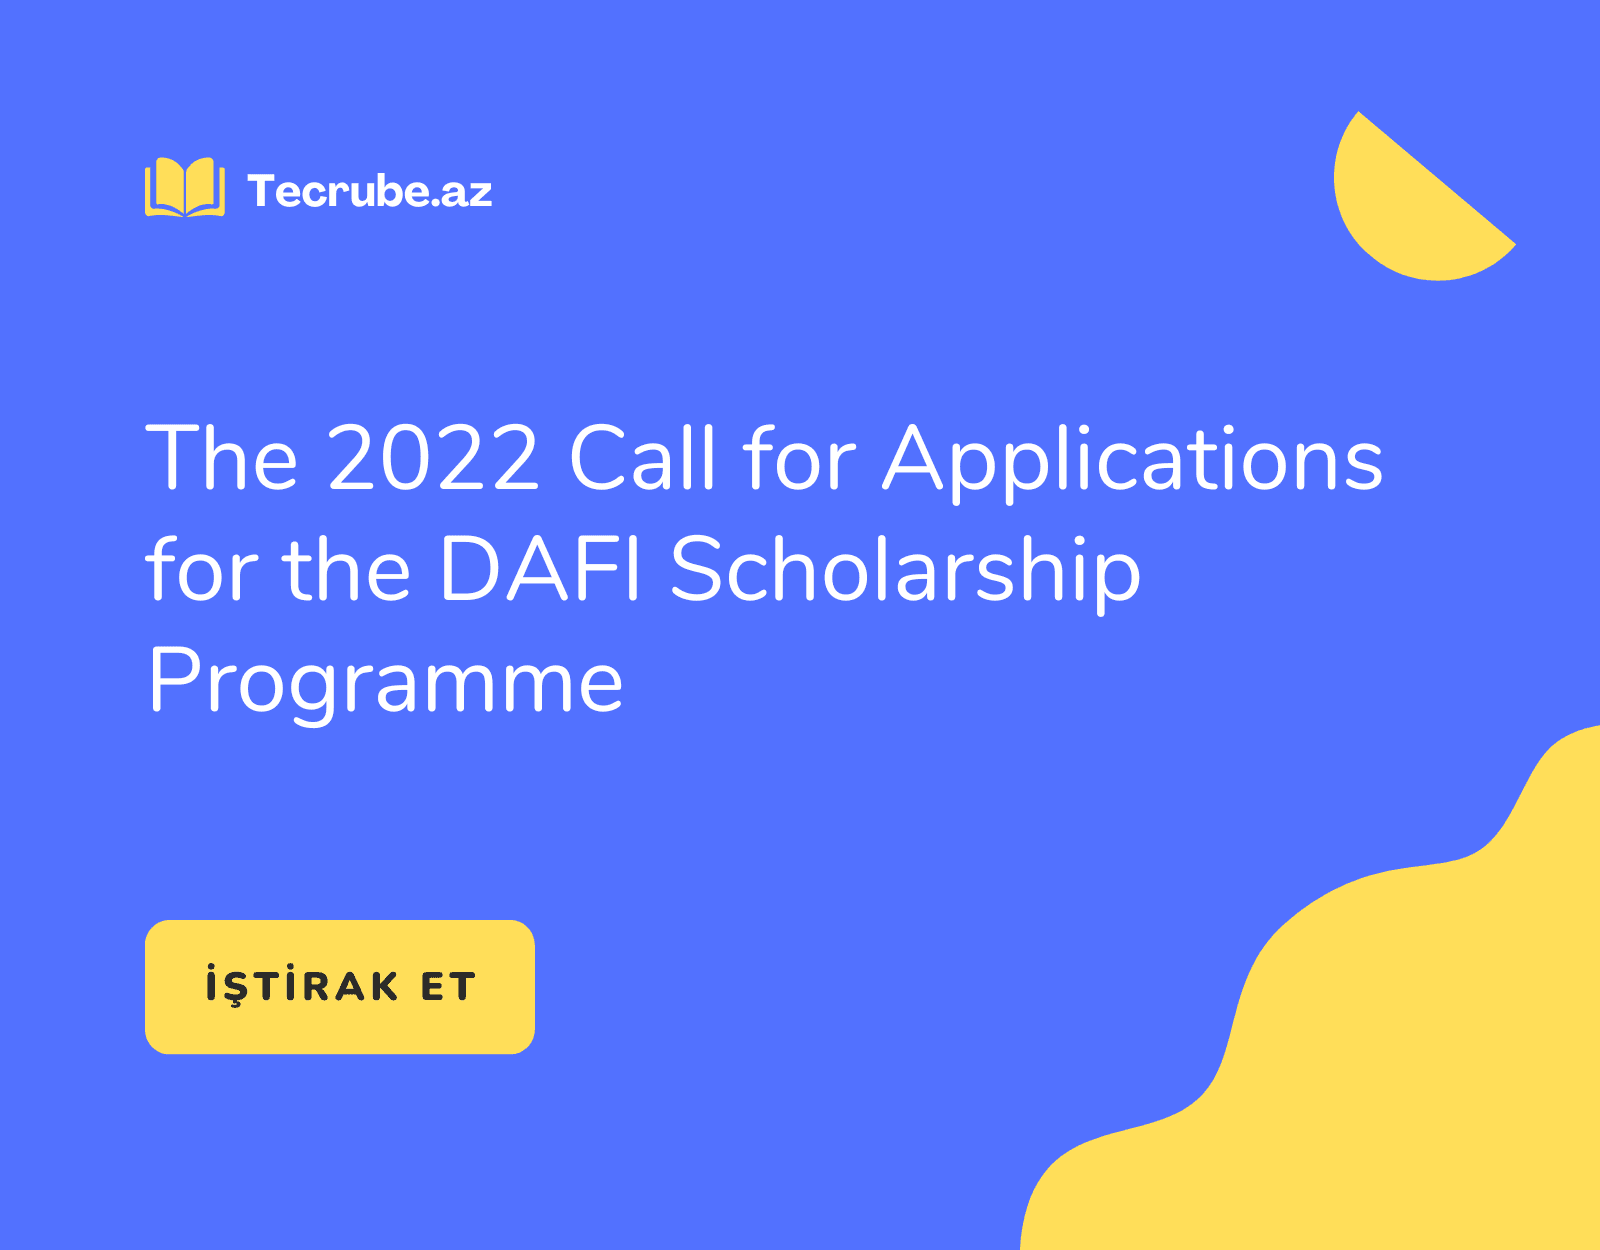 The 2022 Call for Applications for the DAFI Scholarship Programme